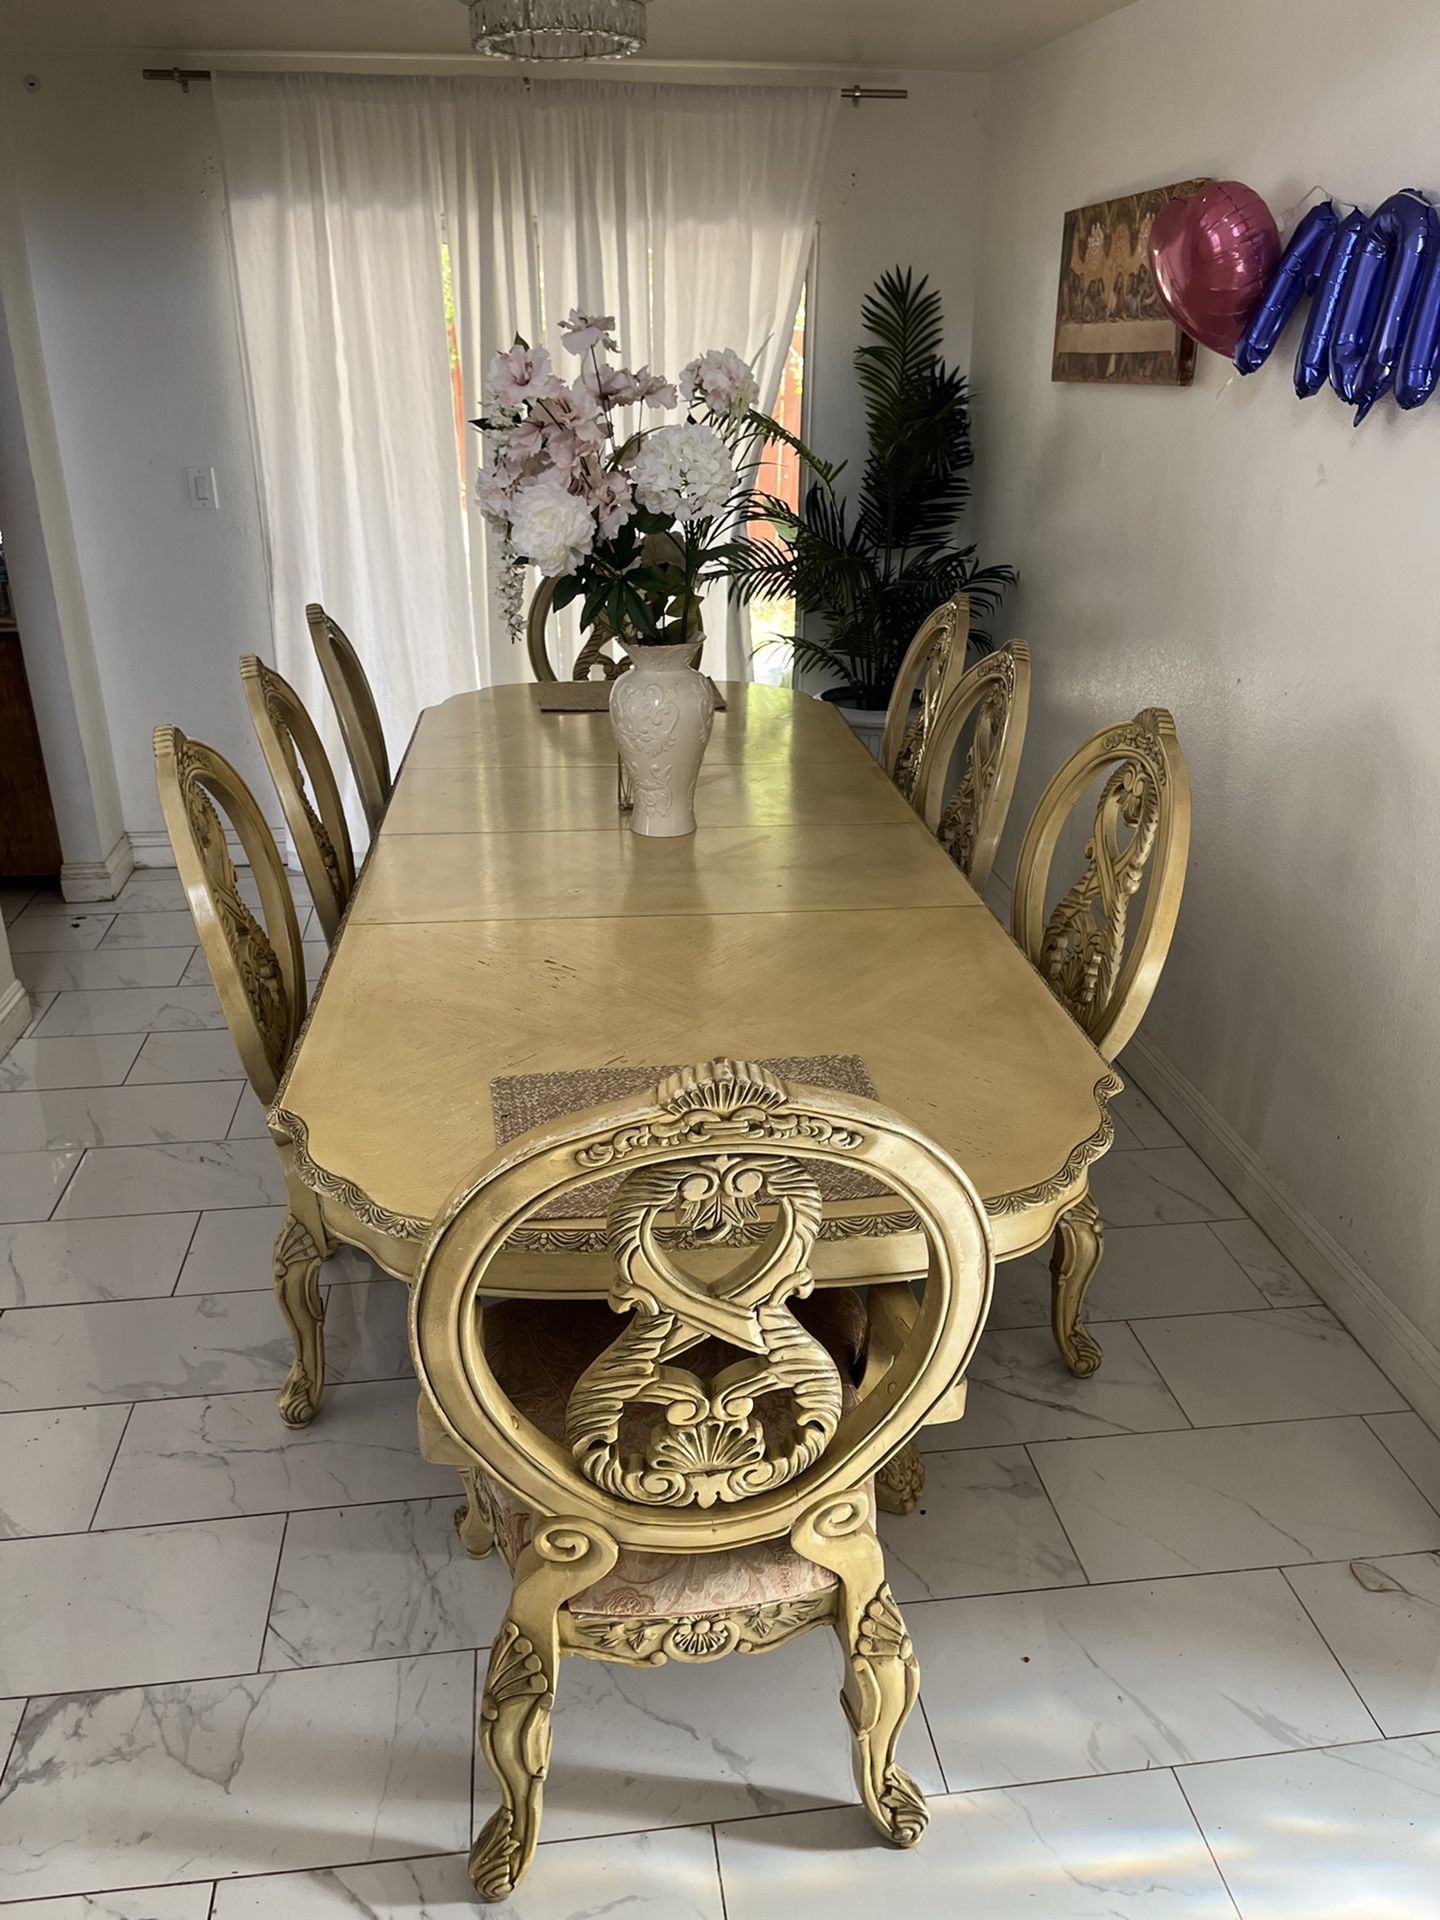 8 Chair Dinning Table 